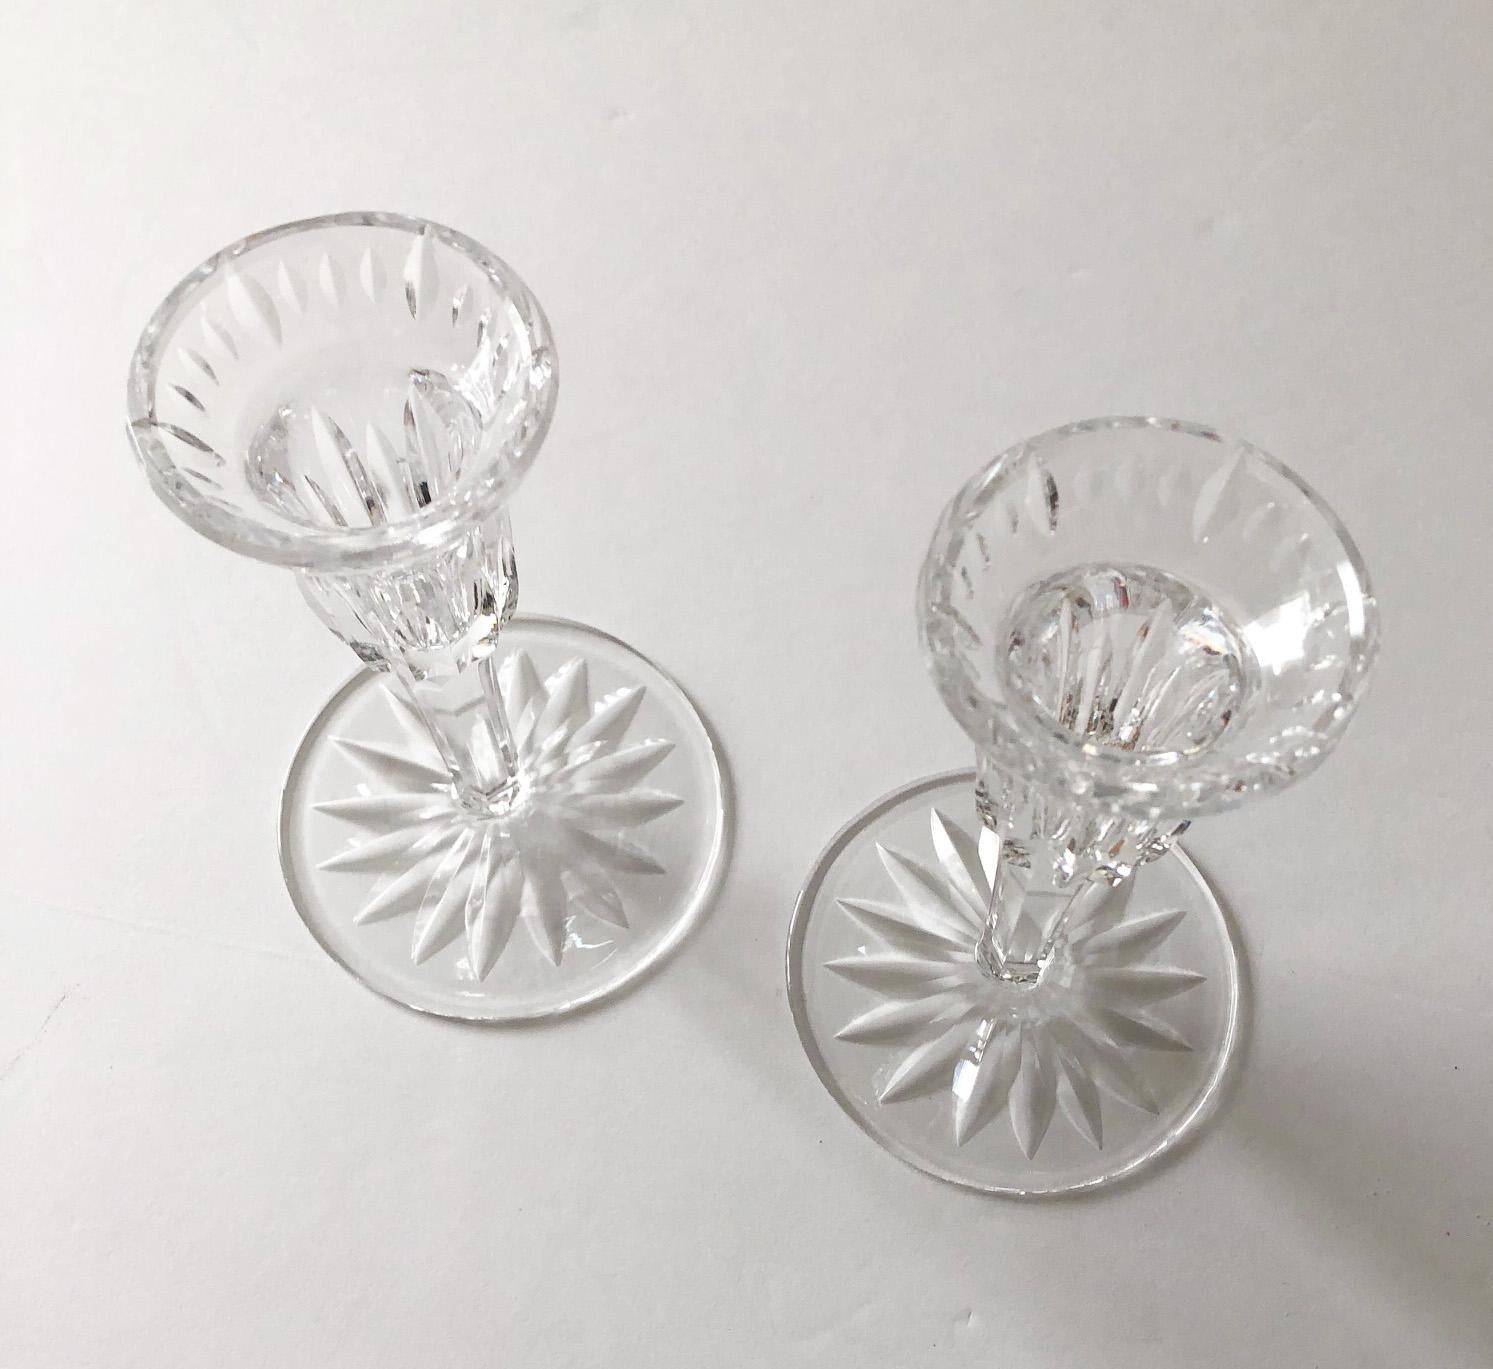 Beautiful pair of Waterford crystal candlesticks in the Carina pattern, discontinued 2017. Each has the Waterford etched mark on the underside of the base. Measures: Each, 3.75